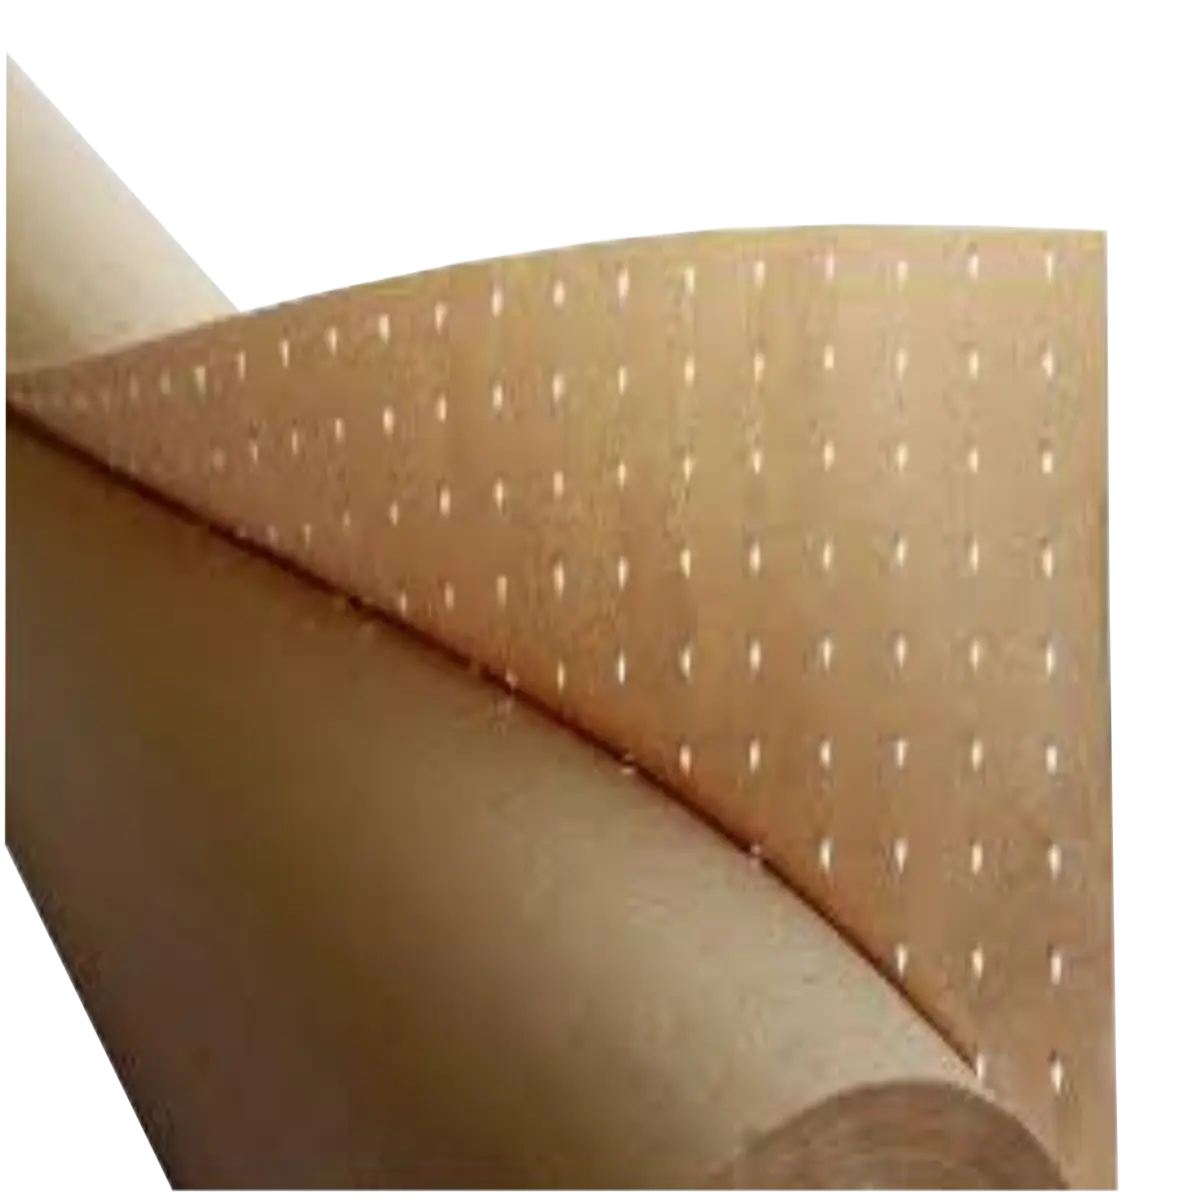 Perforated Kraft underlay used in cutting rooms. Used by clothing, upholstery, carpet and car manufacturers